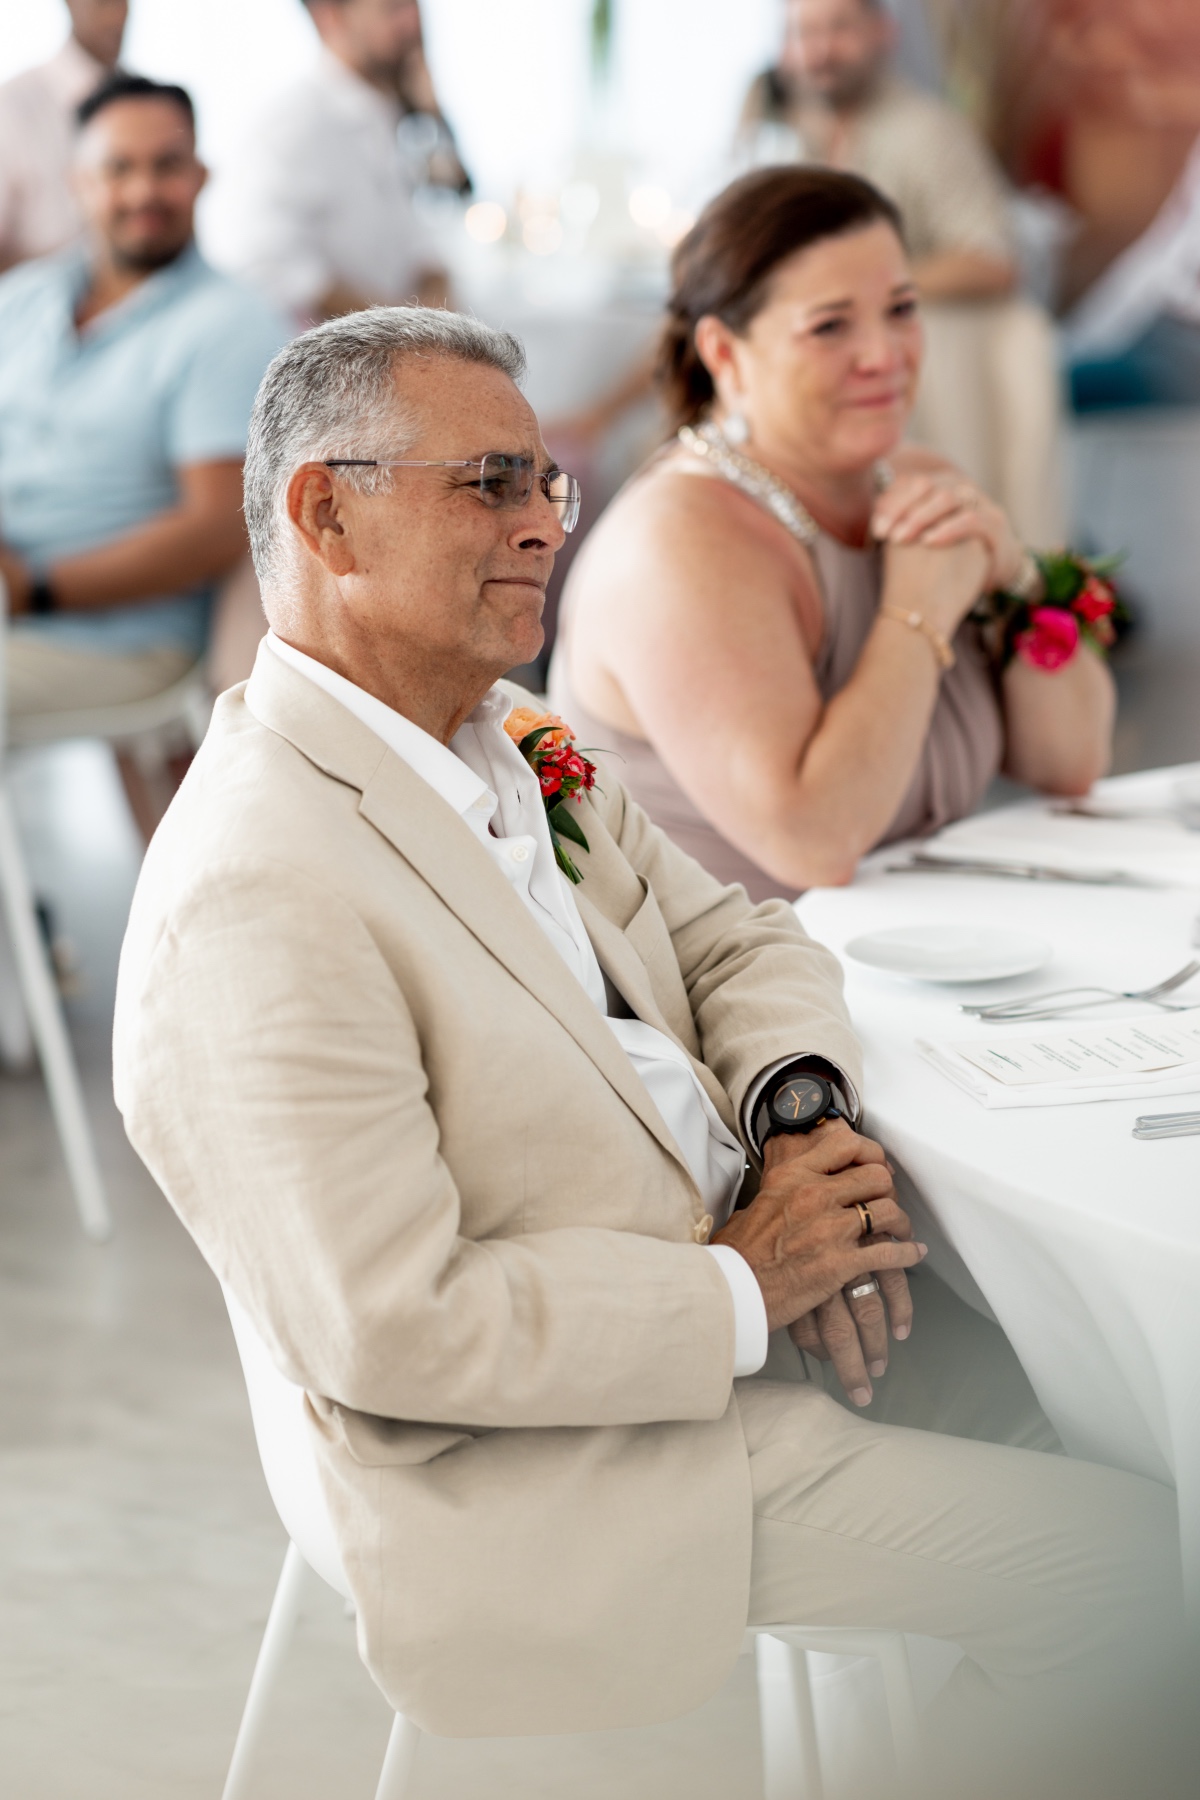 Emotional father of the groom listening to toasts and speeches